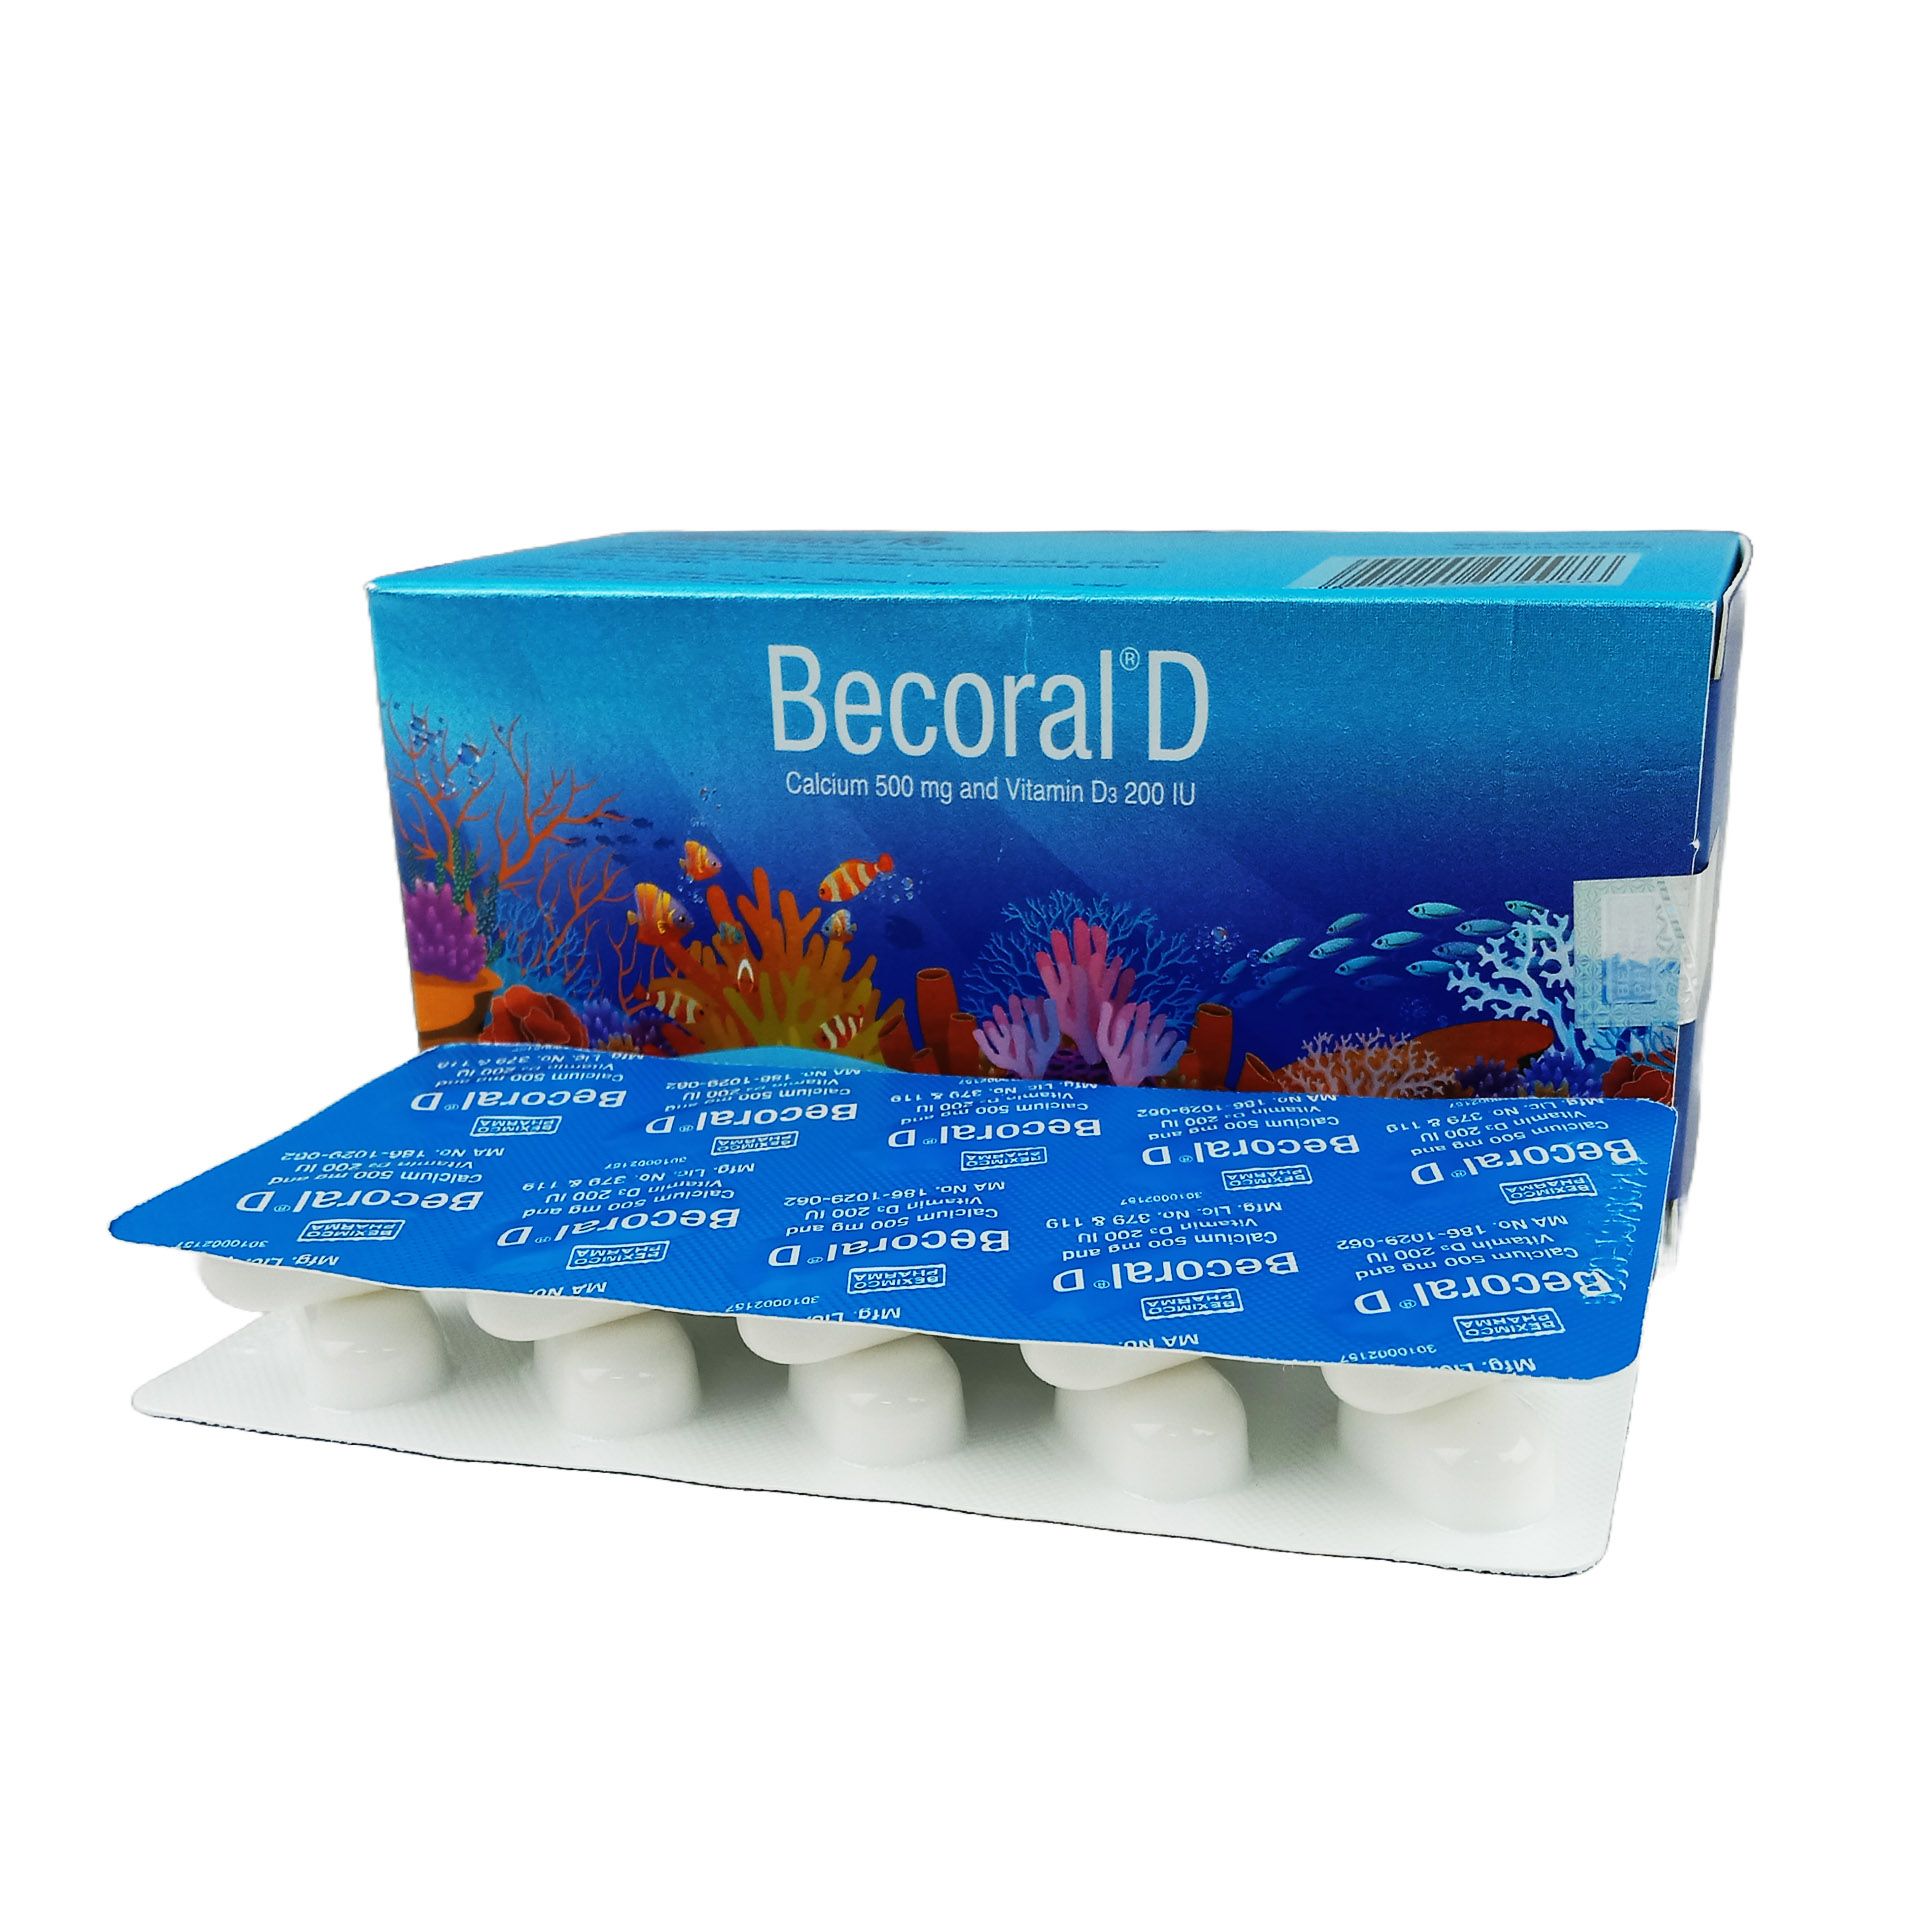 Becoral D 500mg+200IU Tablet